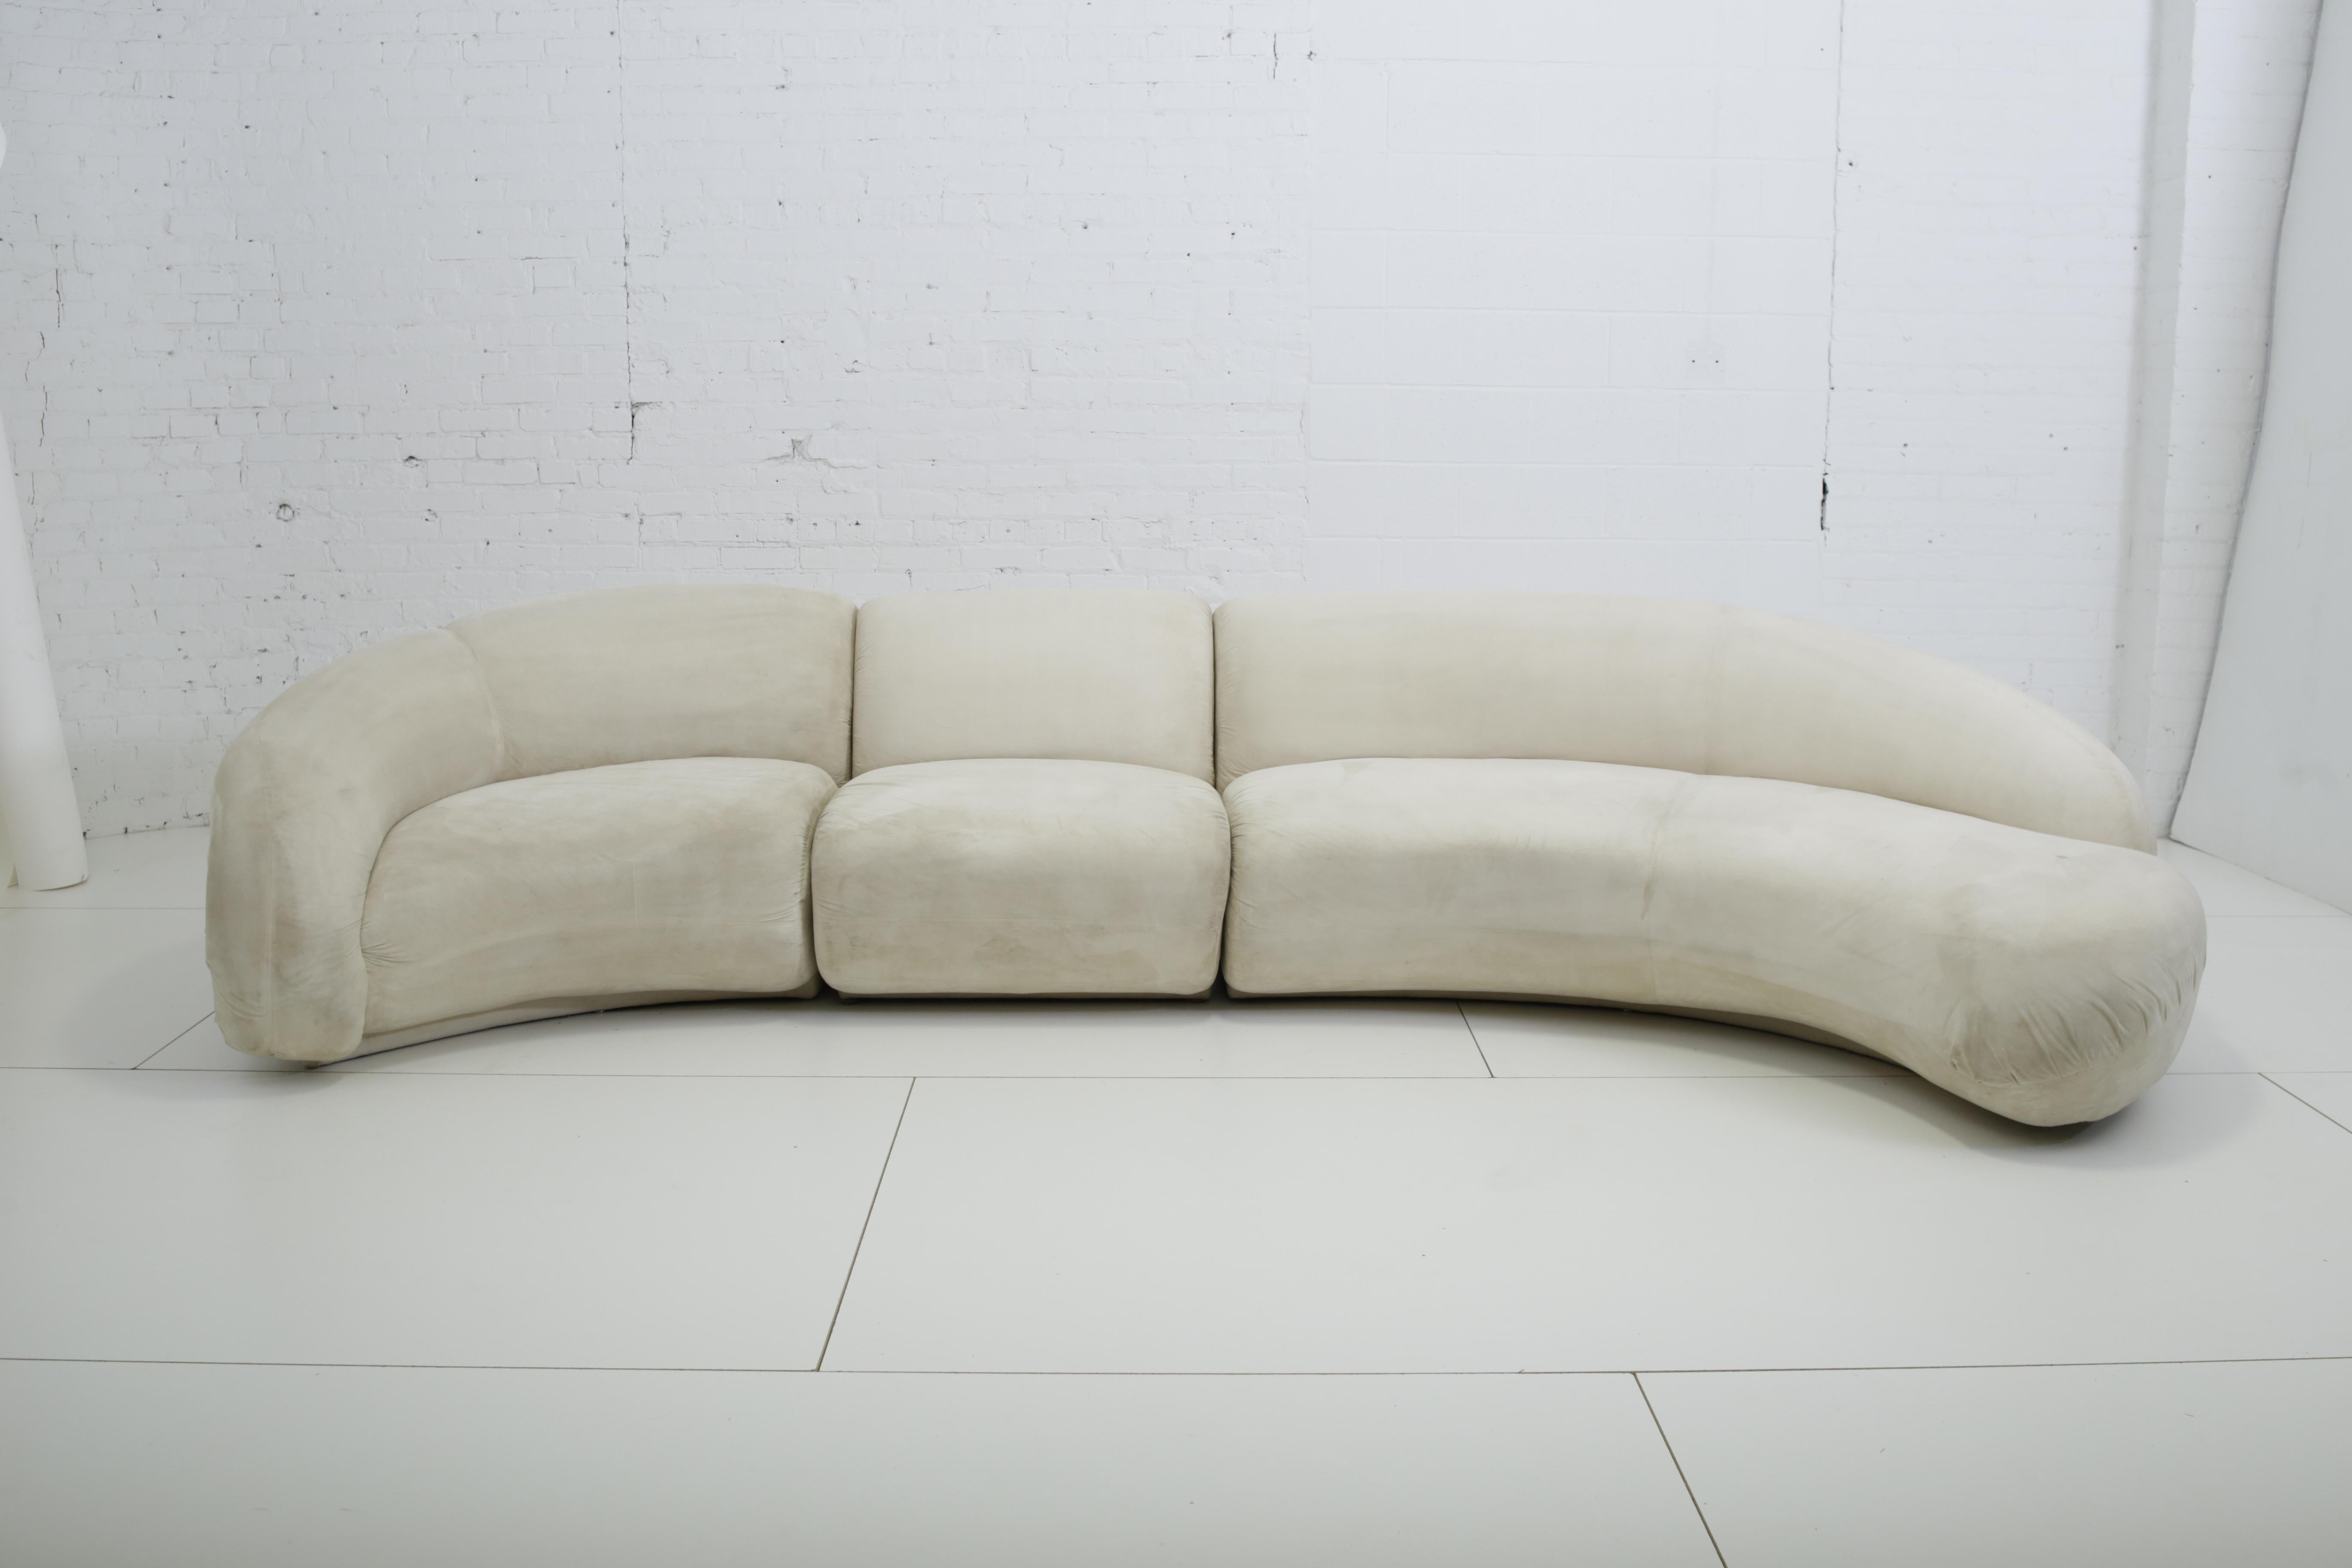 Three-piece biomorphic sectional sofa Weiman-Preview.